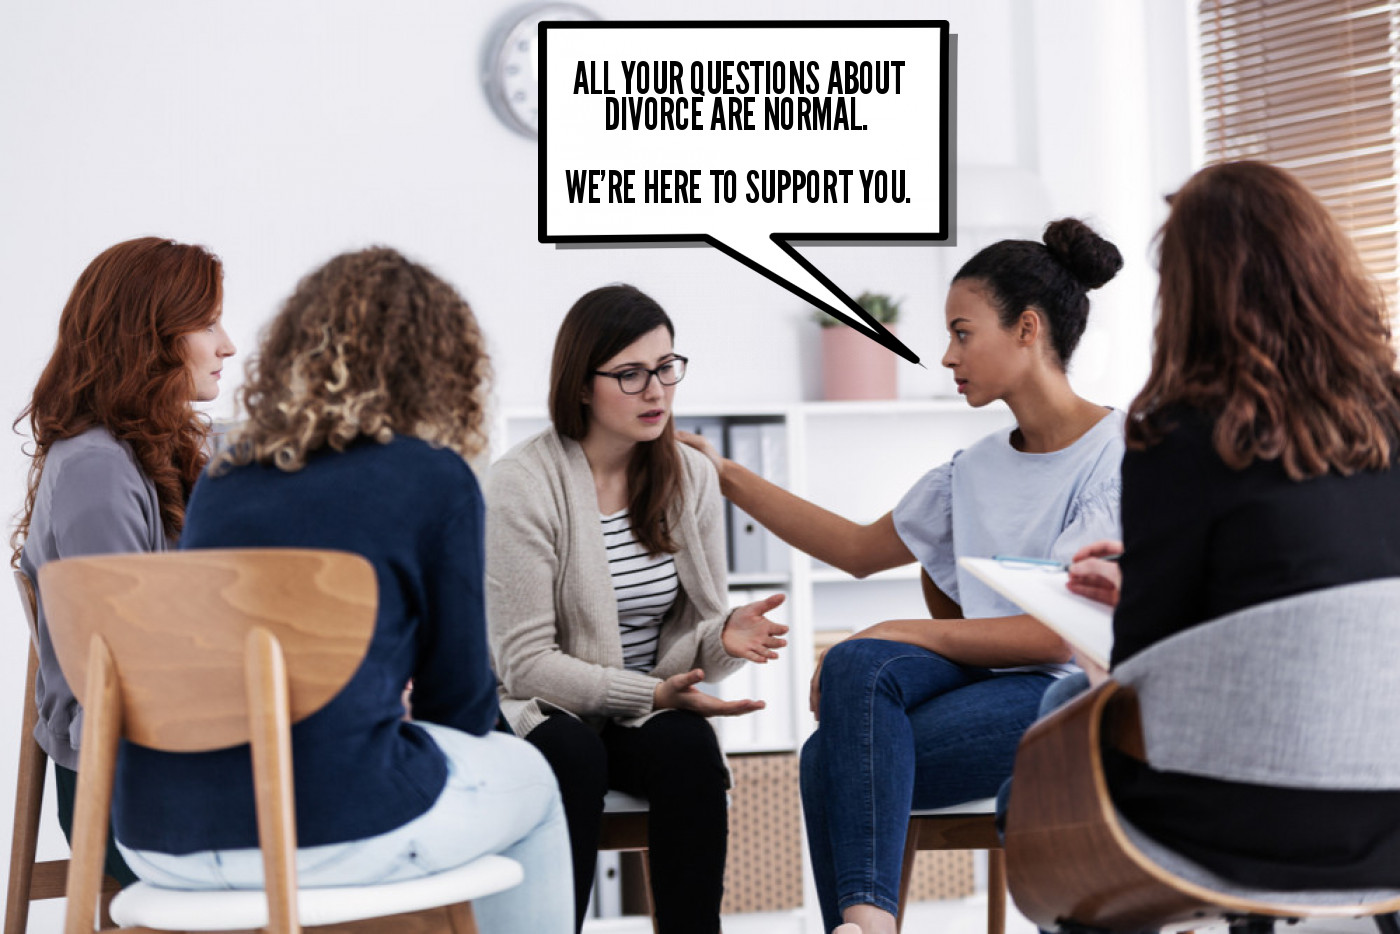 A group of women sitting in a room talking to each other.